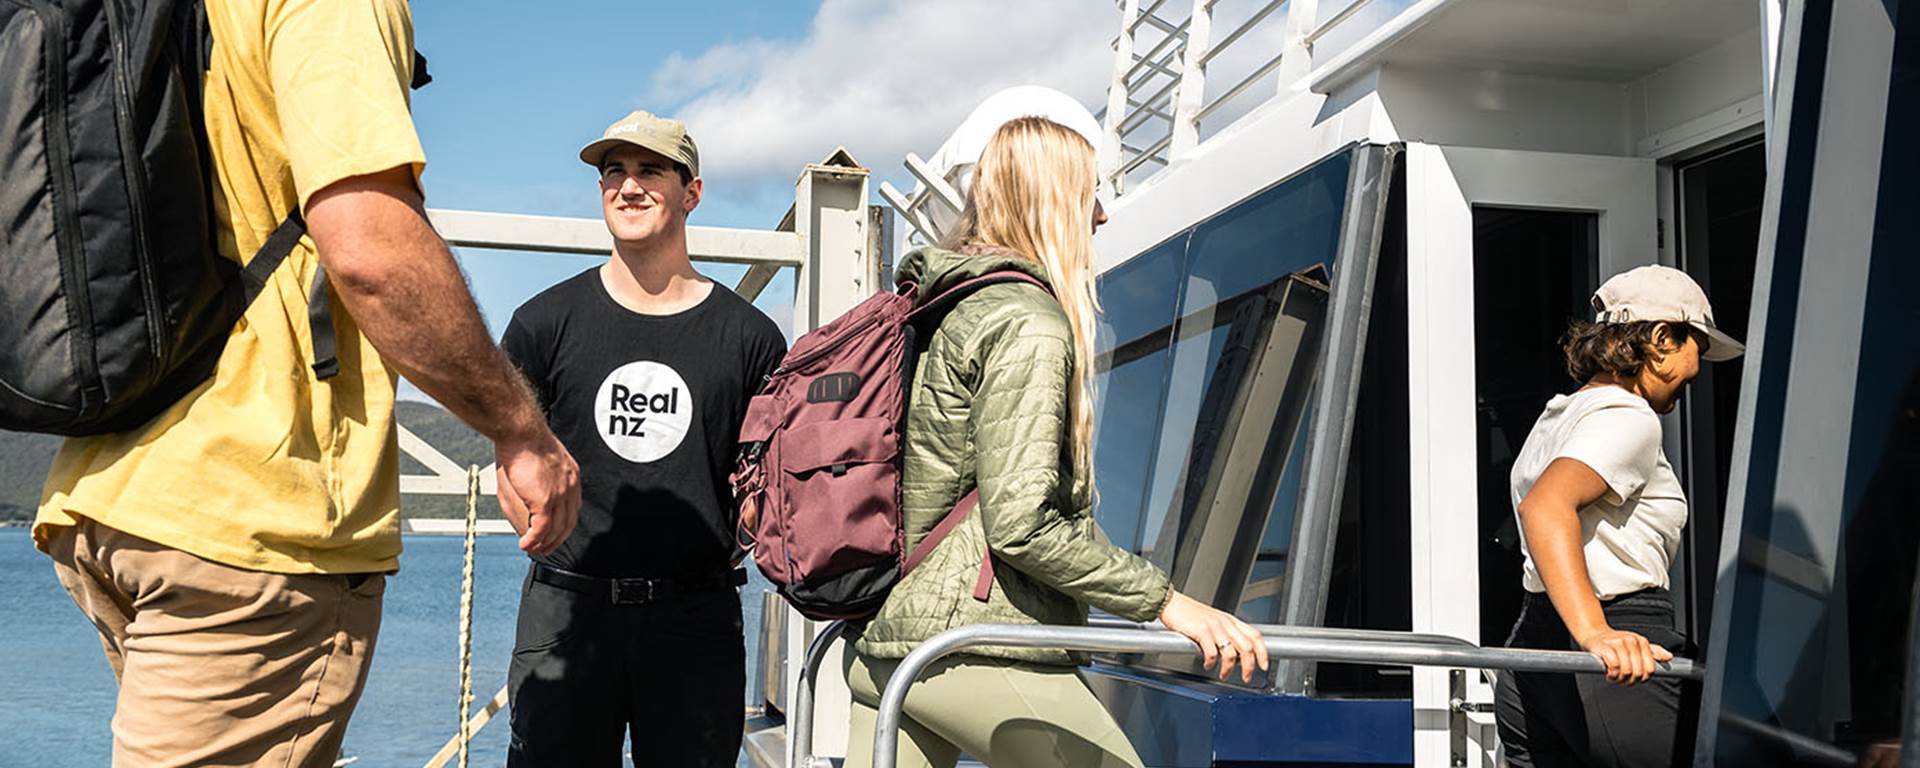 Three guests are welcomed on board a ferry by a friendly RealNZ employee